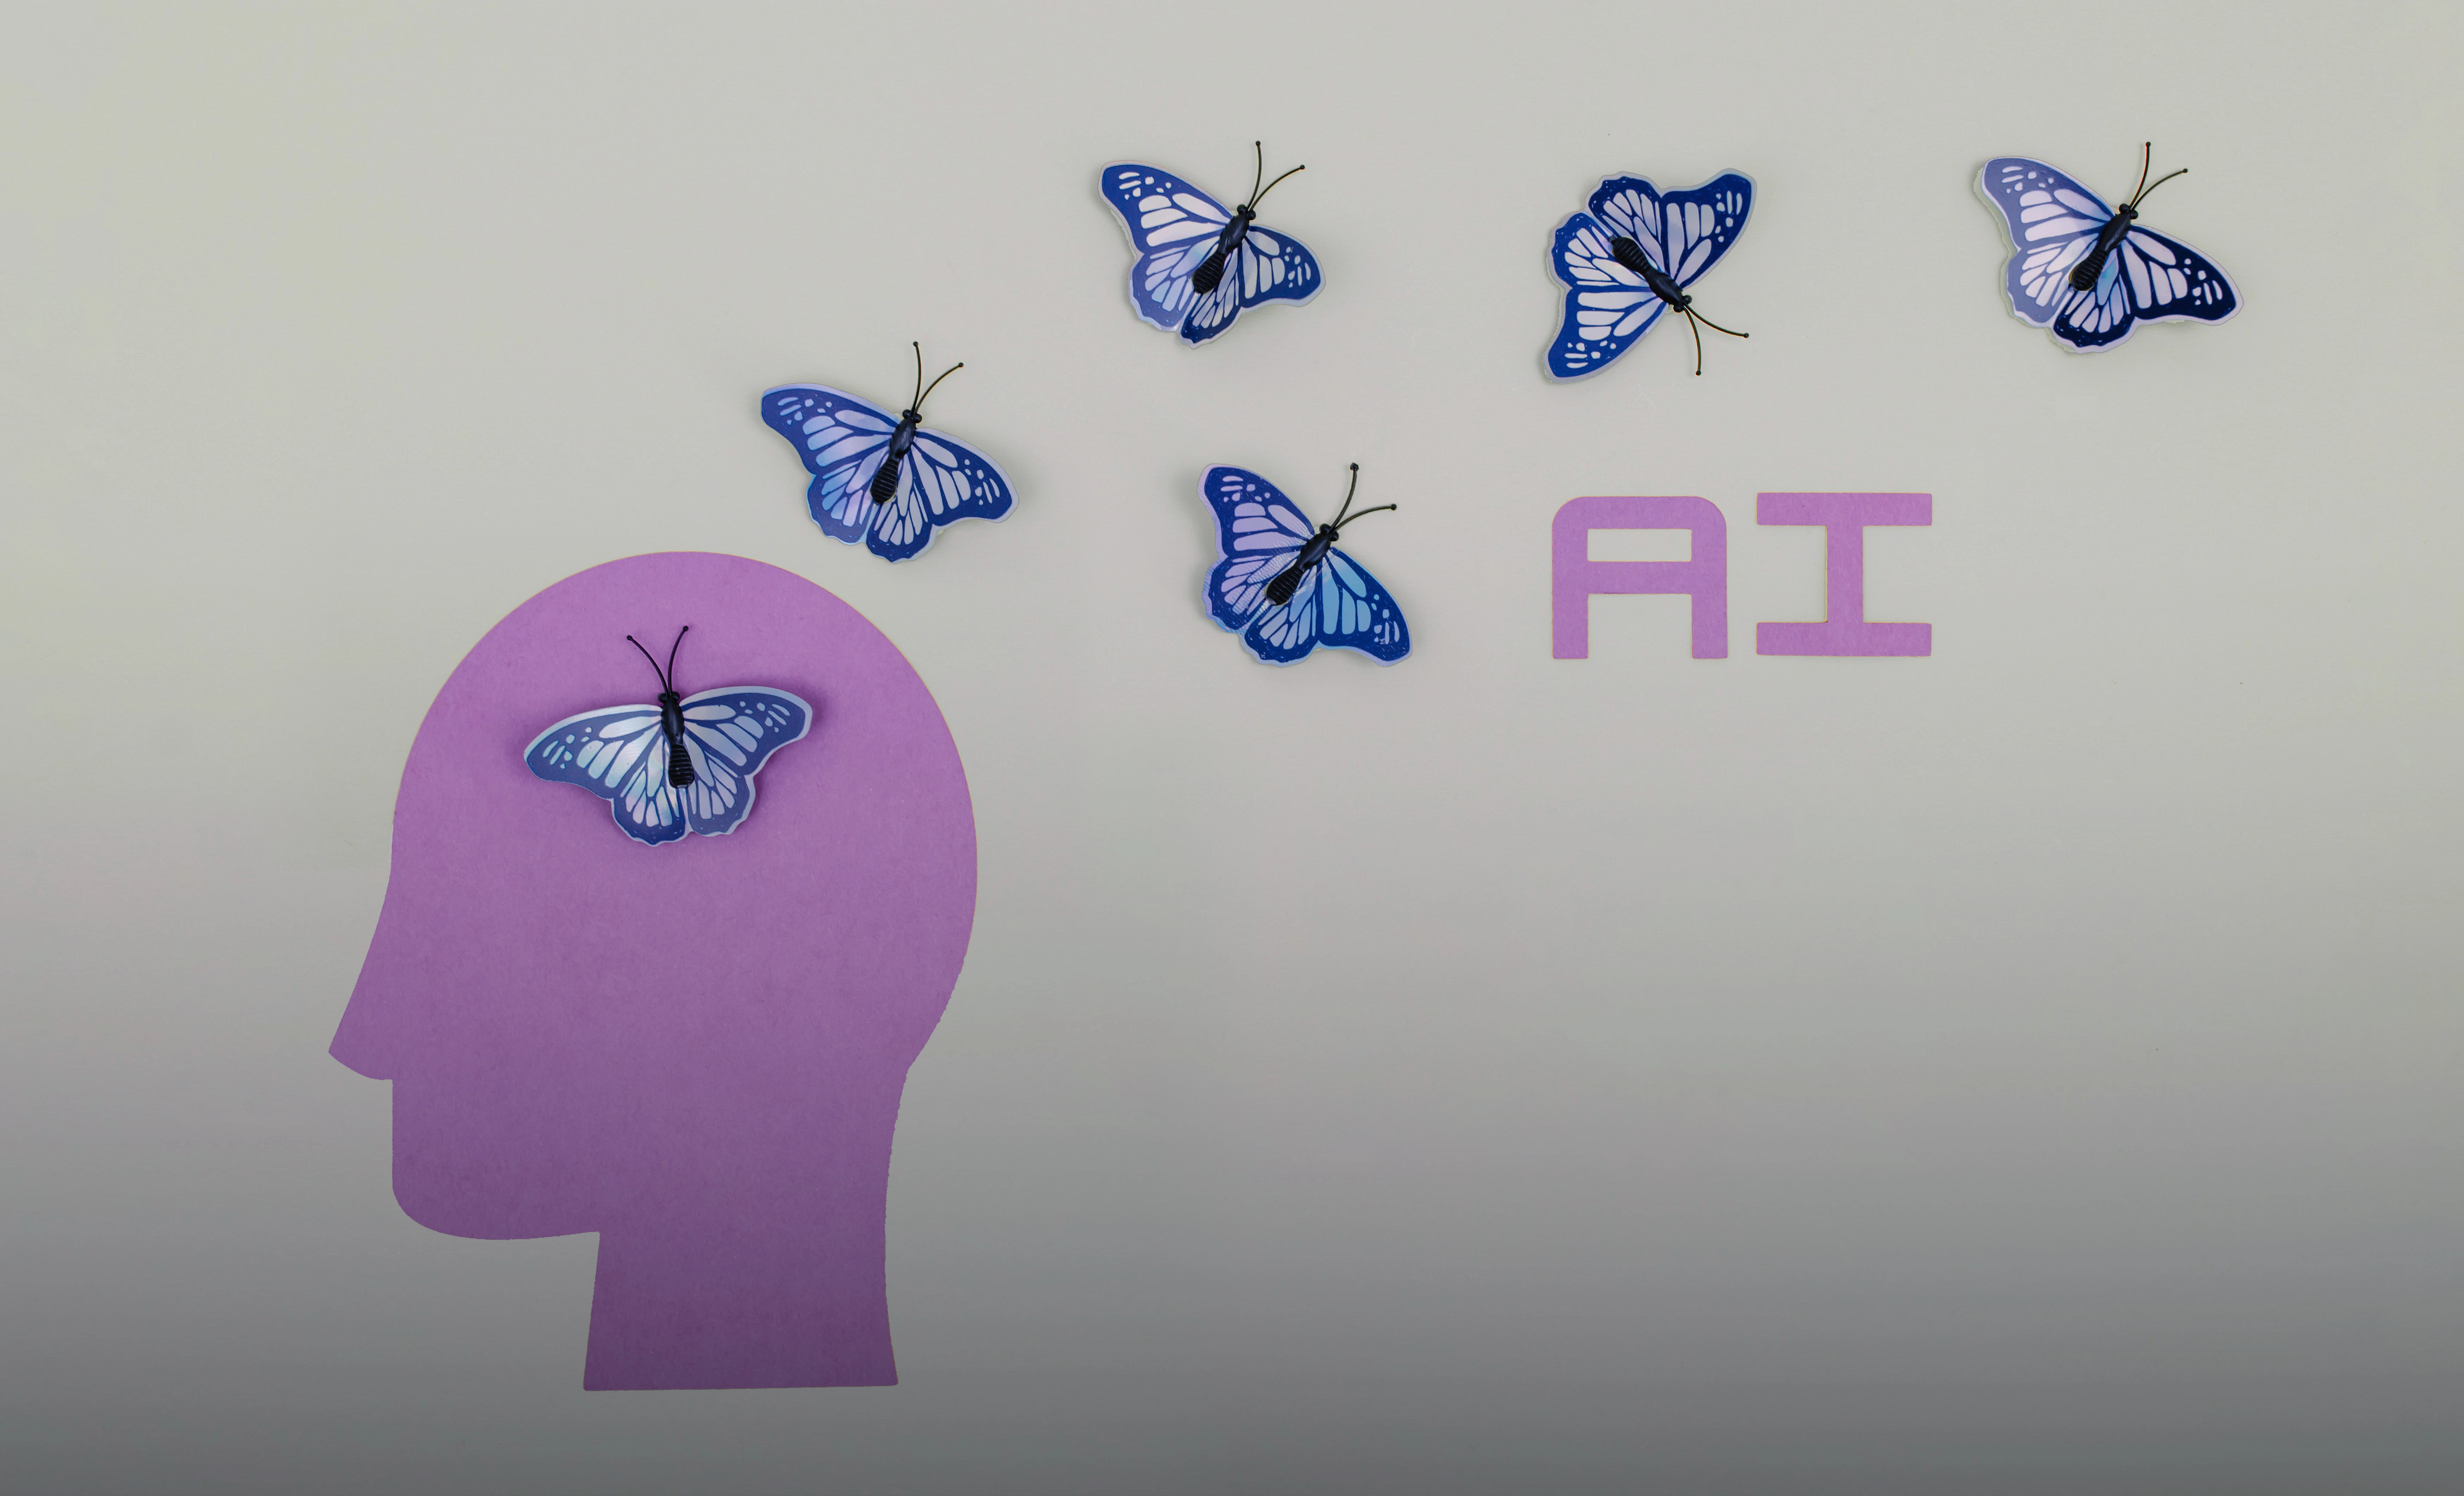 A pink graphic image of a head with next to purple butterflies and the letters "AI."